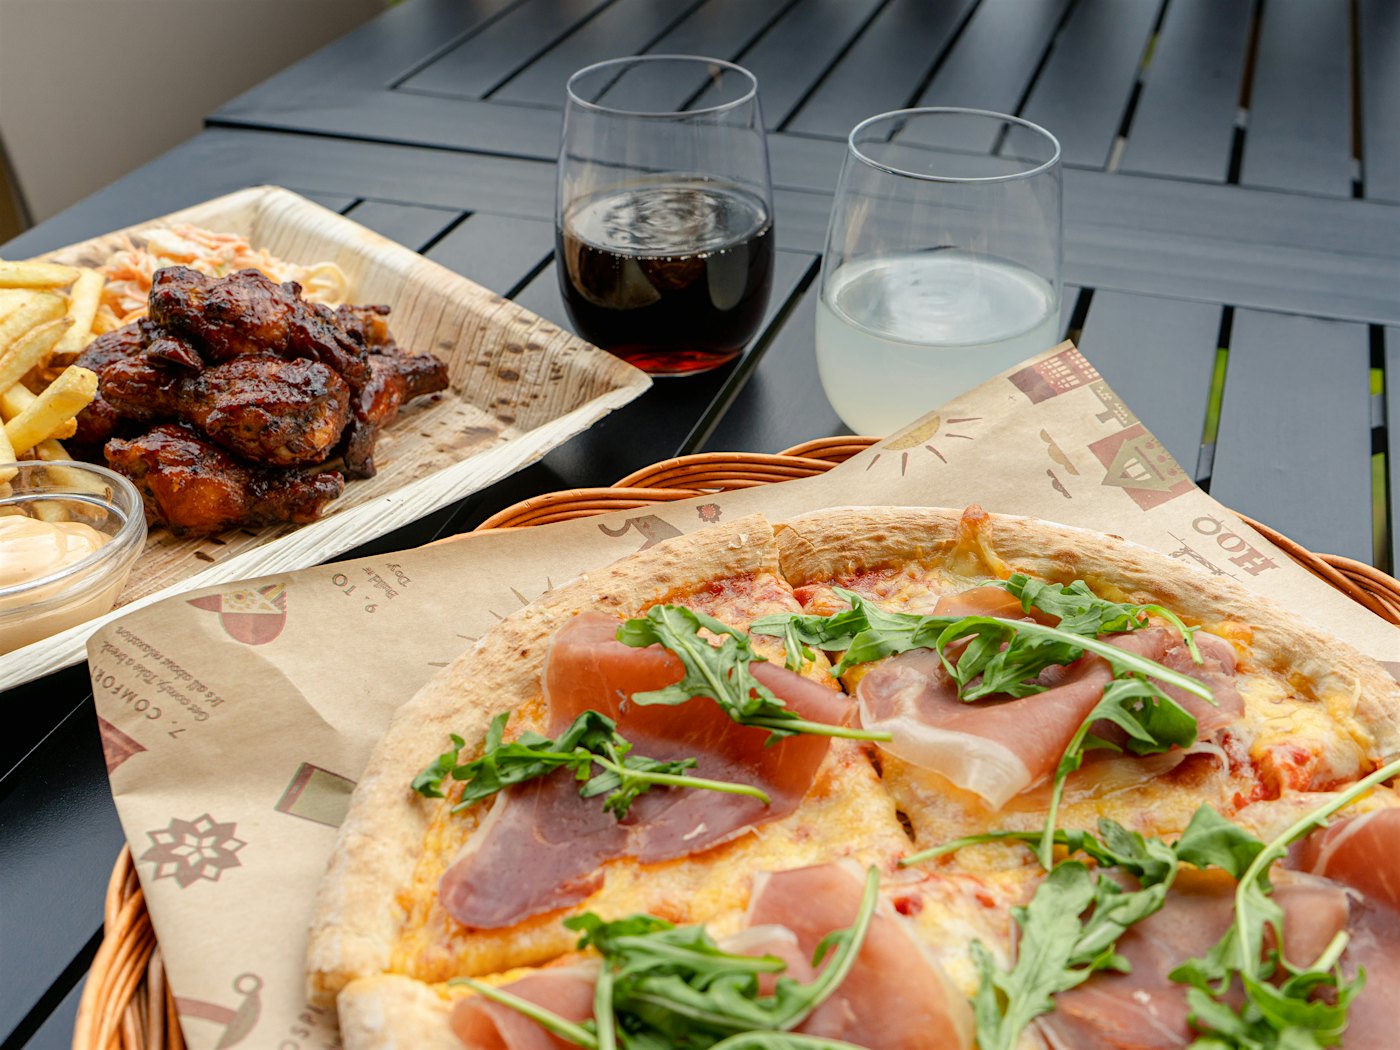 Pizza with Parma ham and arugula, buffalo wings with fries, soda in a glass in the background. Photo